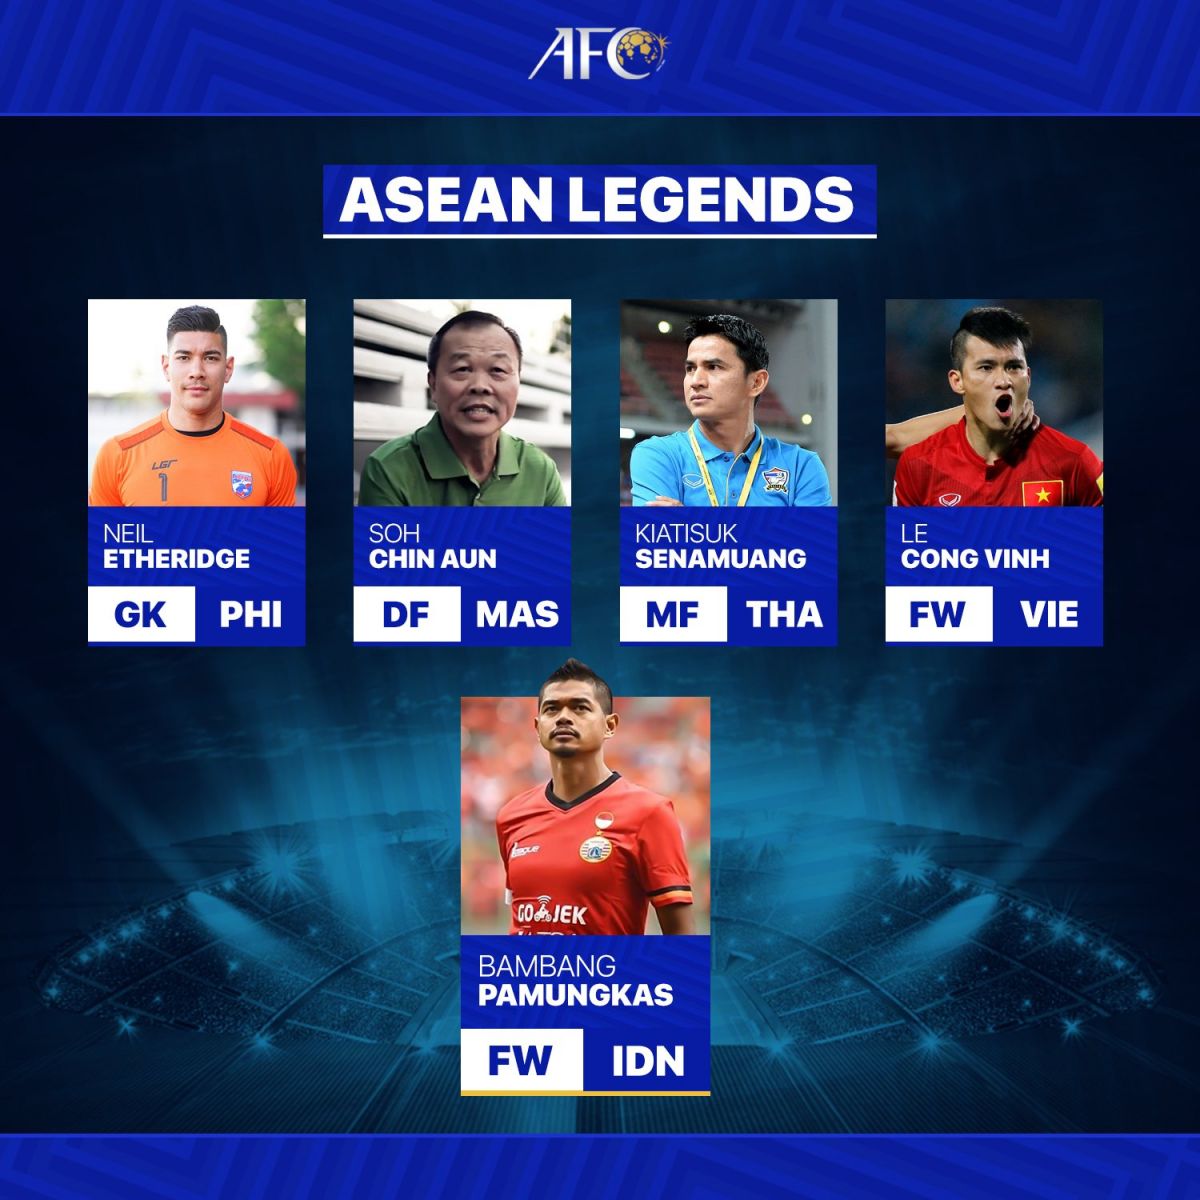 5 legends of Southeast Asia voted by AFC